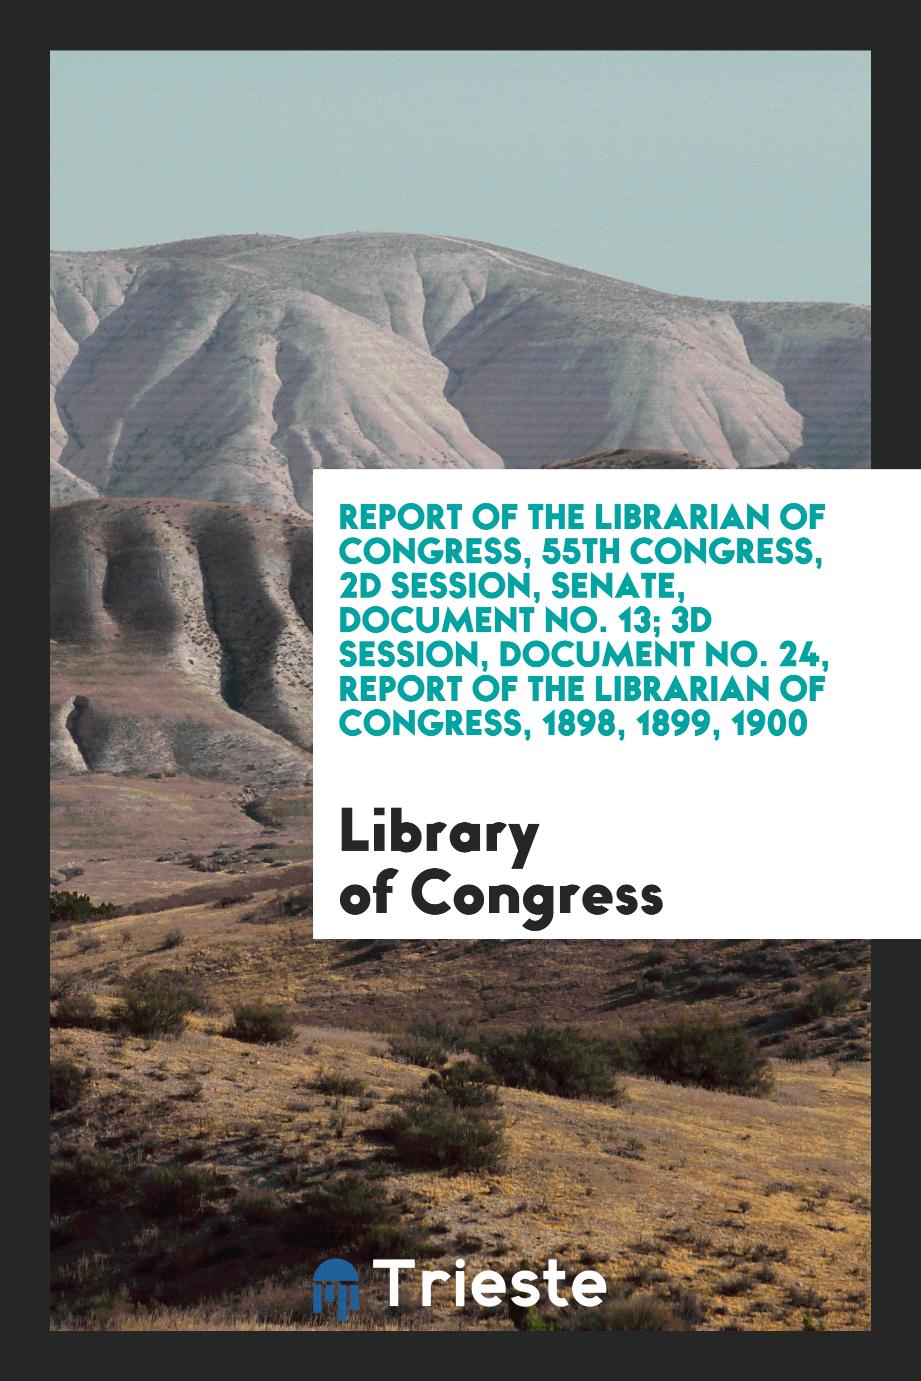 Report of the Librarian of Congress, 55th Congress, 2d Session, Senate, Document No. 13; 3d Session, Document No. 24, Report of the Librarian of Congress, 1898, 1899, 1900